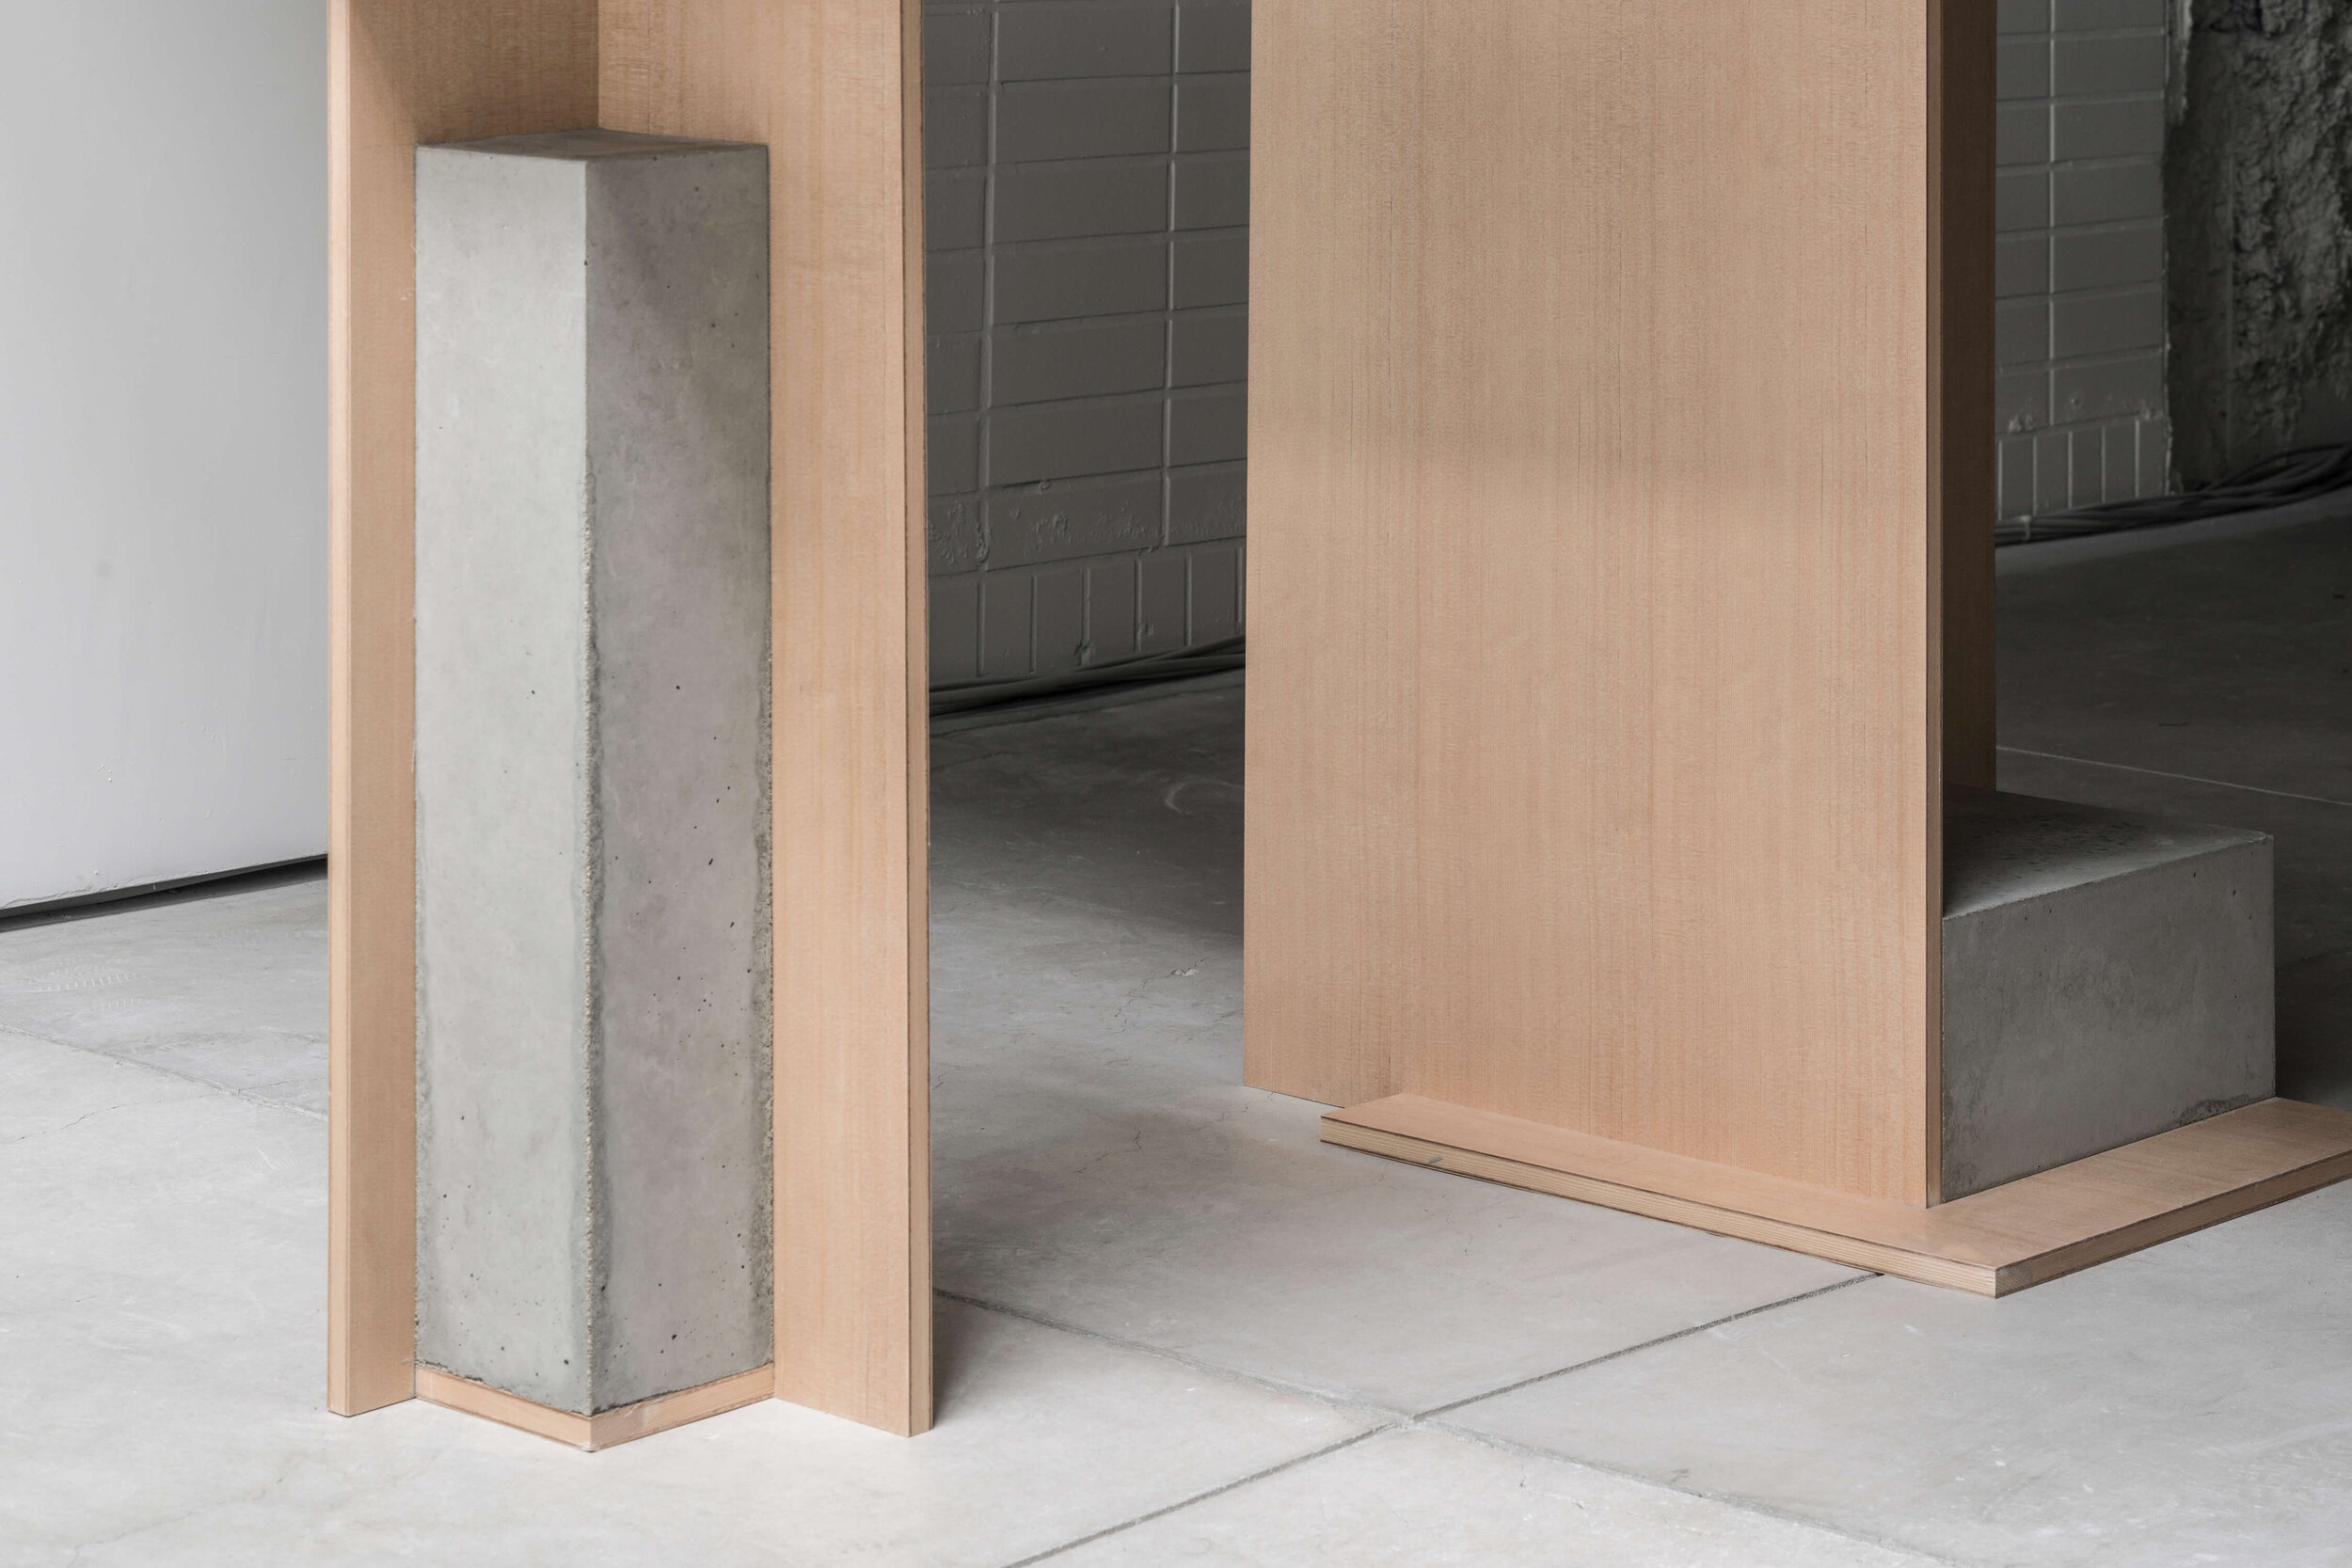  A detail of concrete-made display table designed by Yusuke Seki Studio for Bang &amp; Olufsen Pop-up Store in Kyoto.  